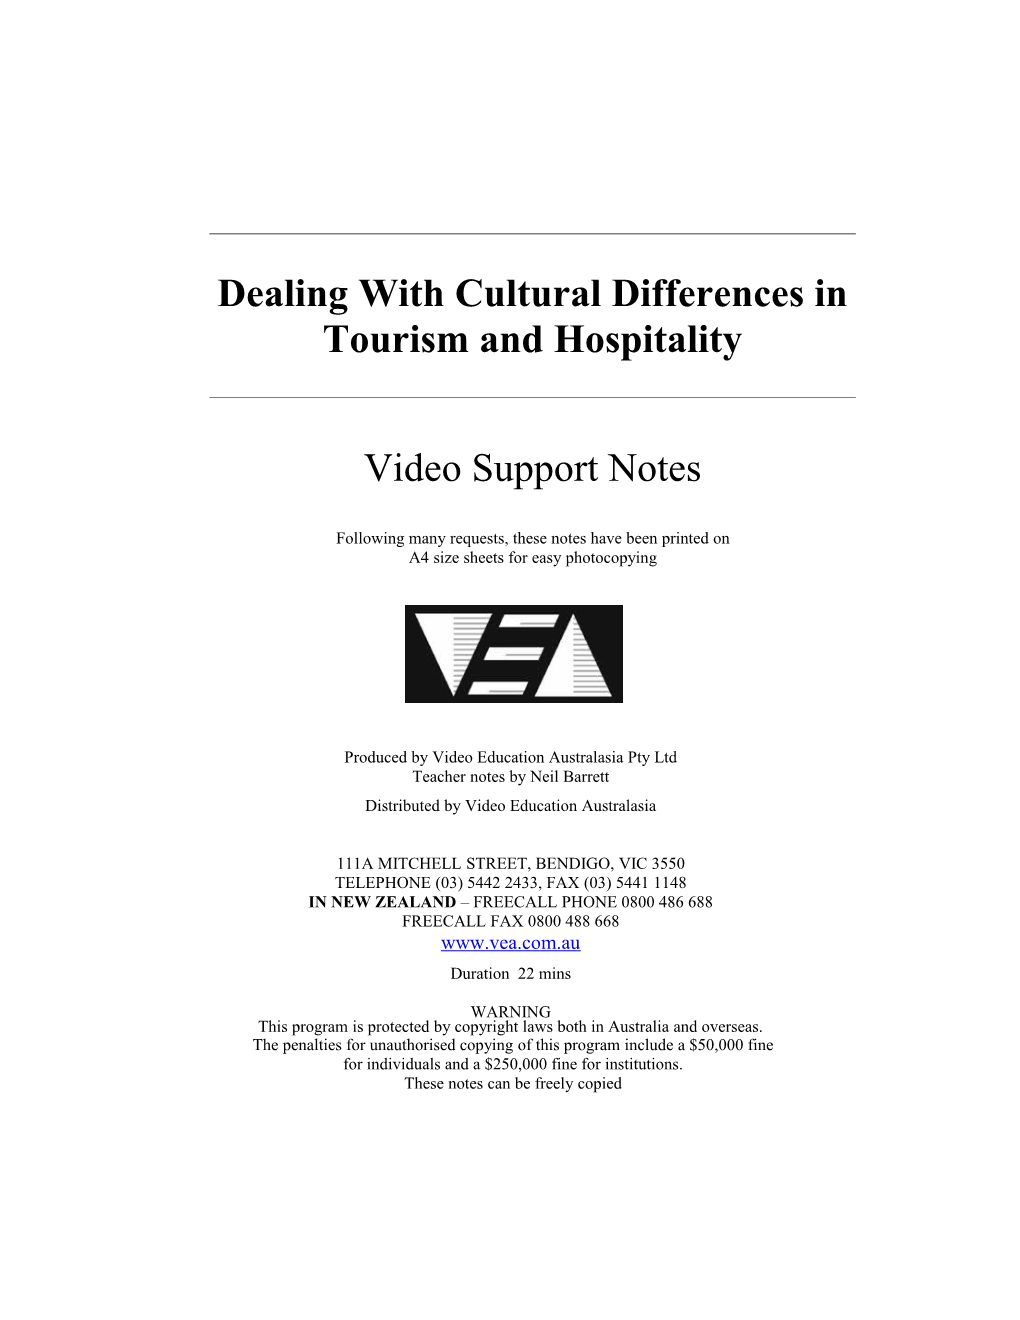 Dealing with Cultural Differences in Tourism